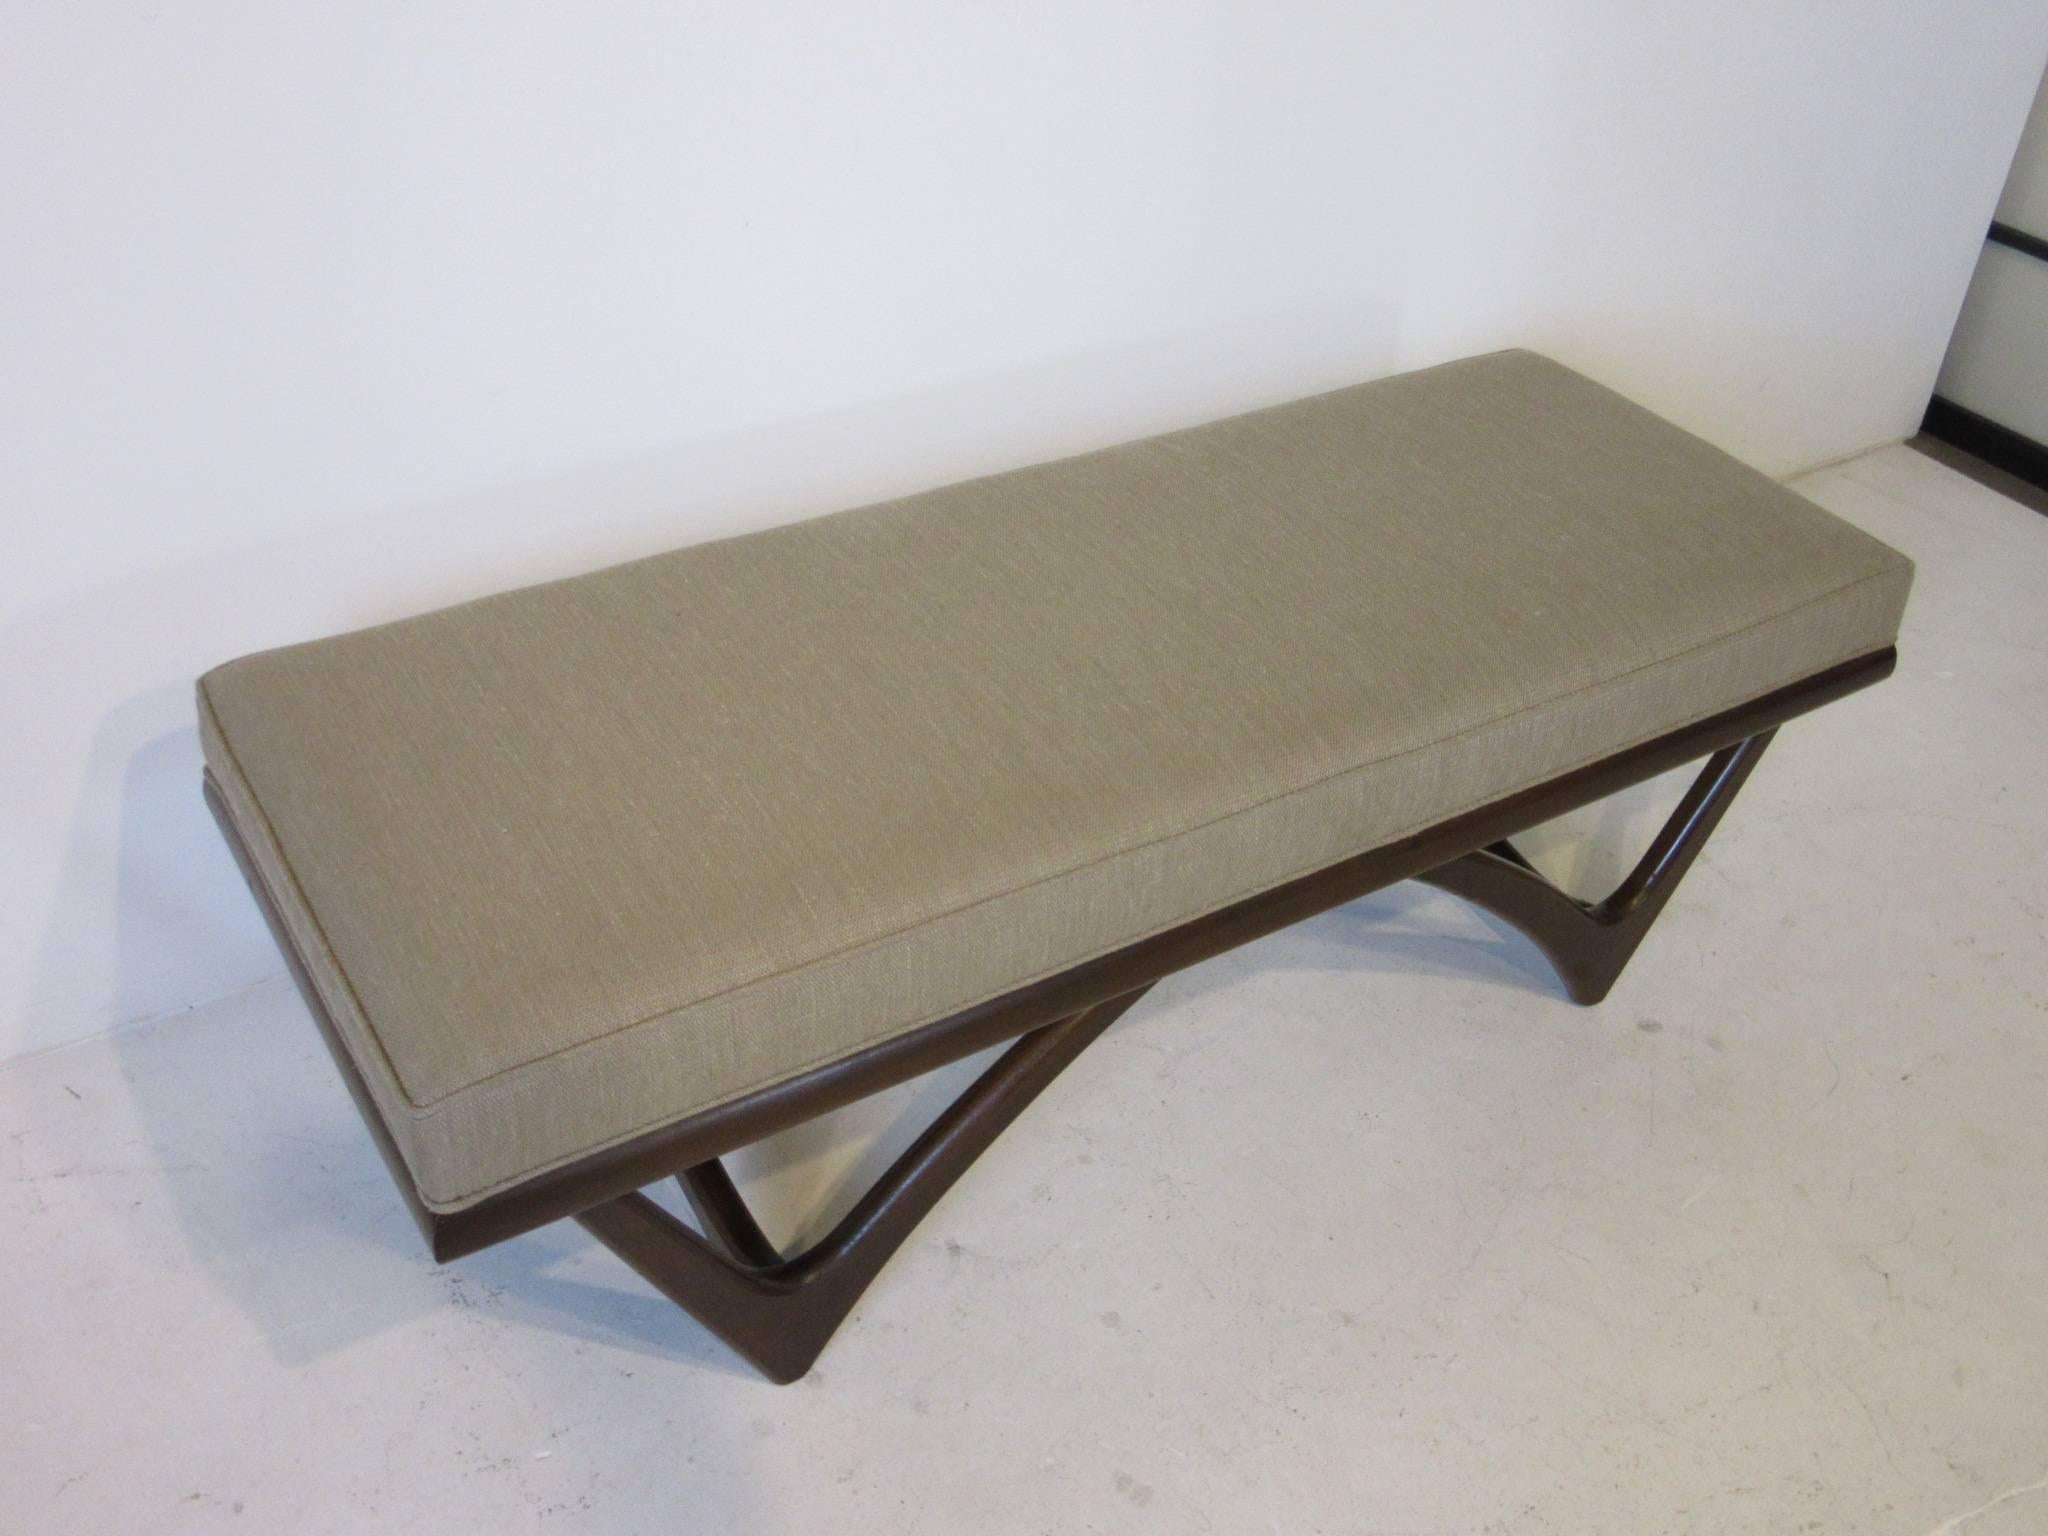 20th Century Adrian Pearsall Styled Sculptural Wood Upholstered Bench